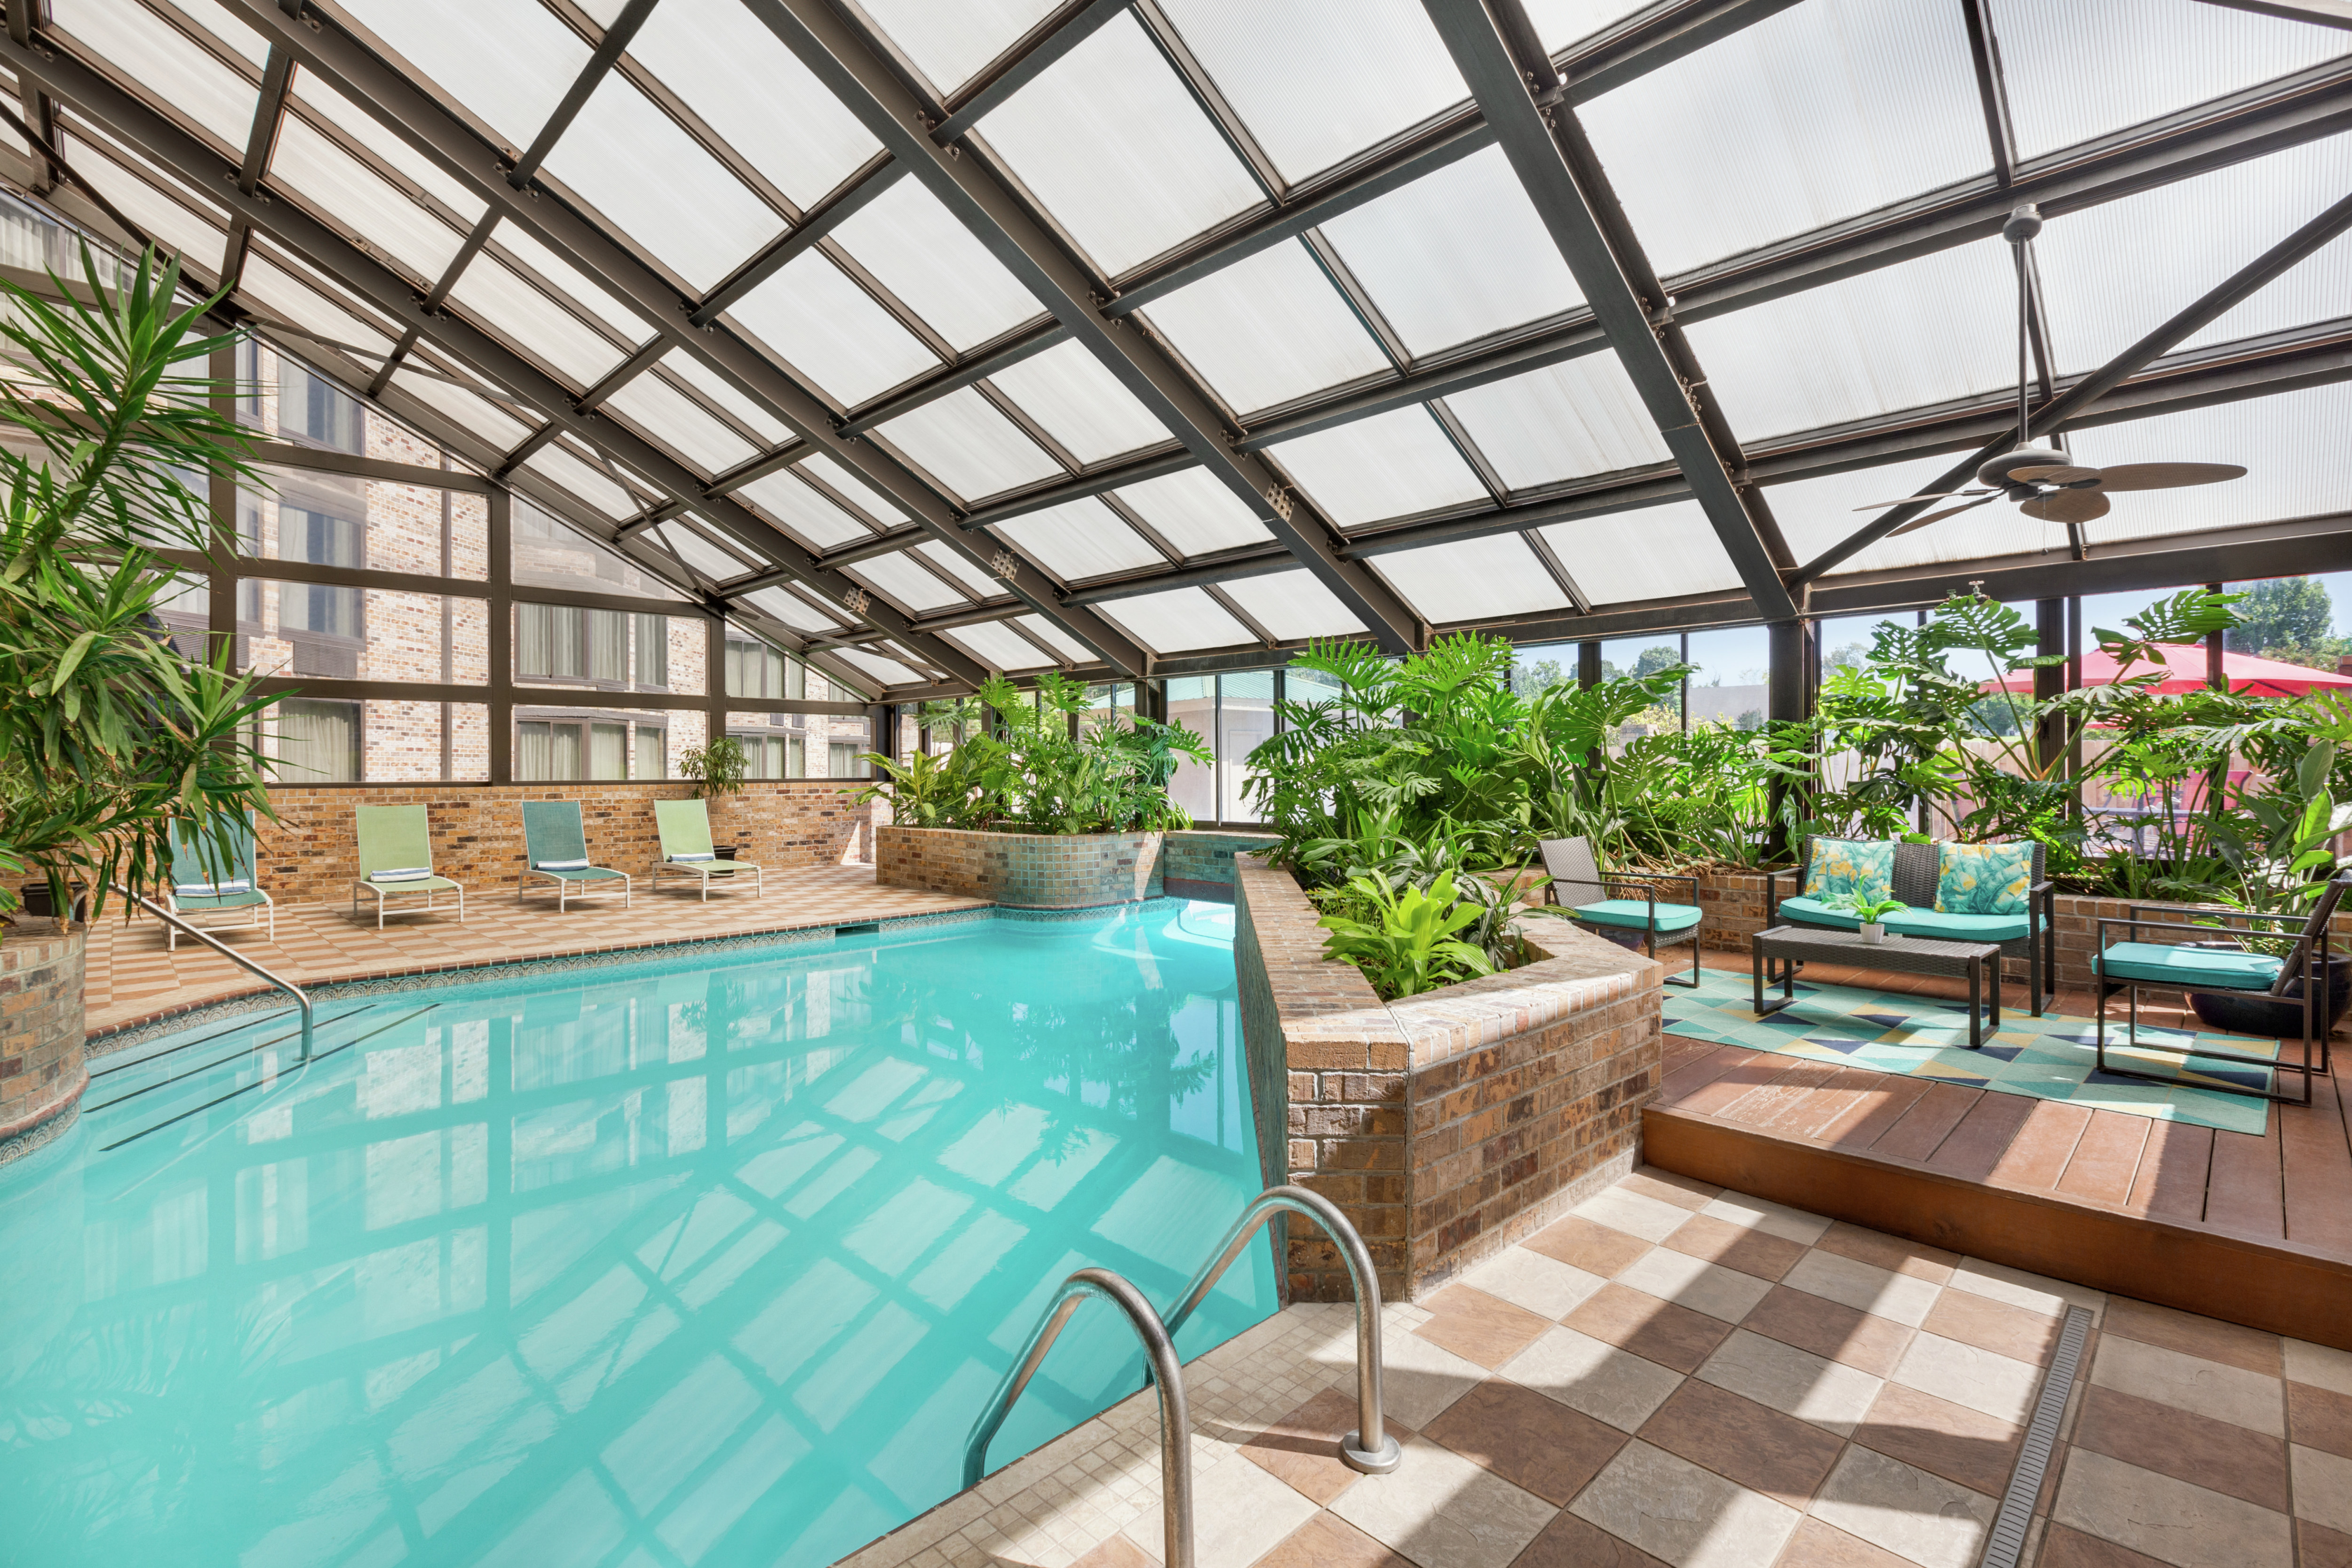 Spacious on-site indoor pool featuring ample light, lush greenery, and comfortable seating.